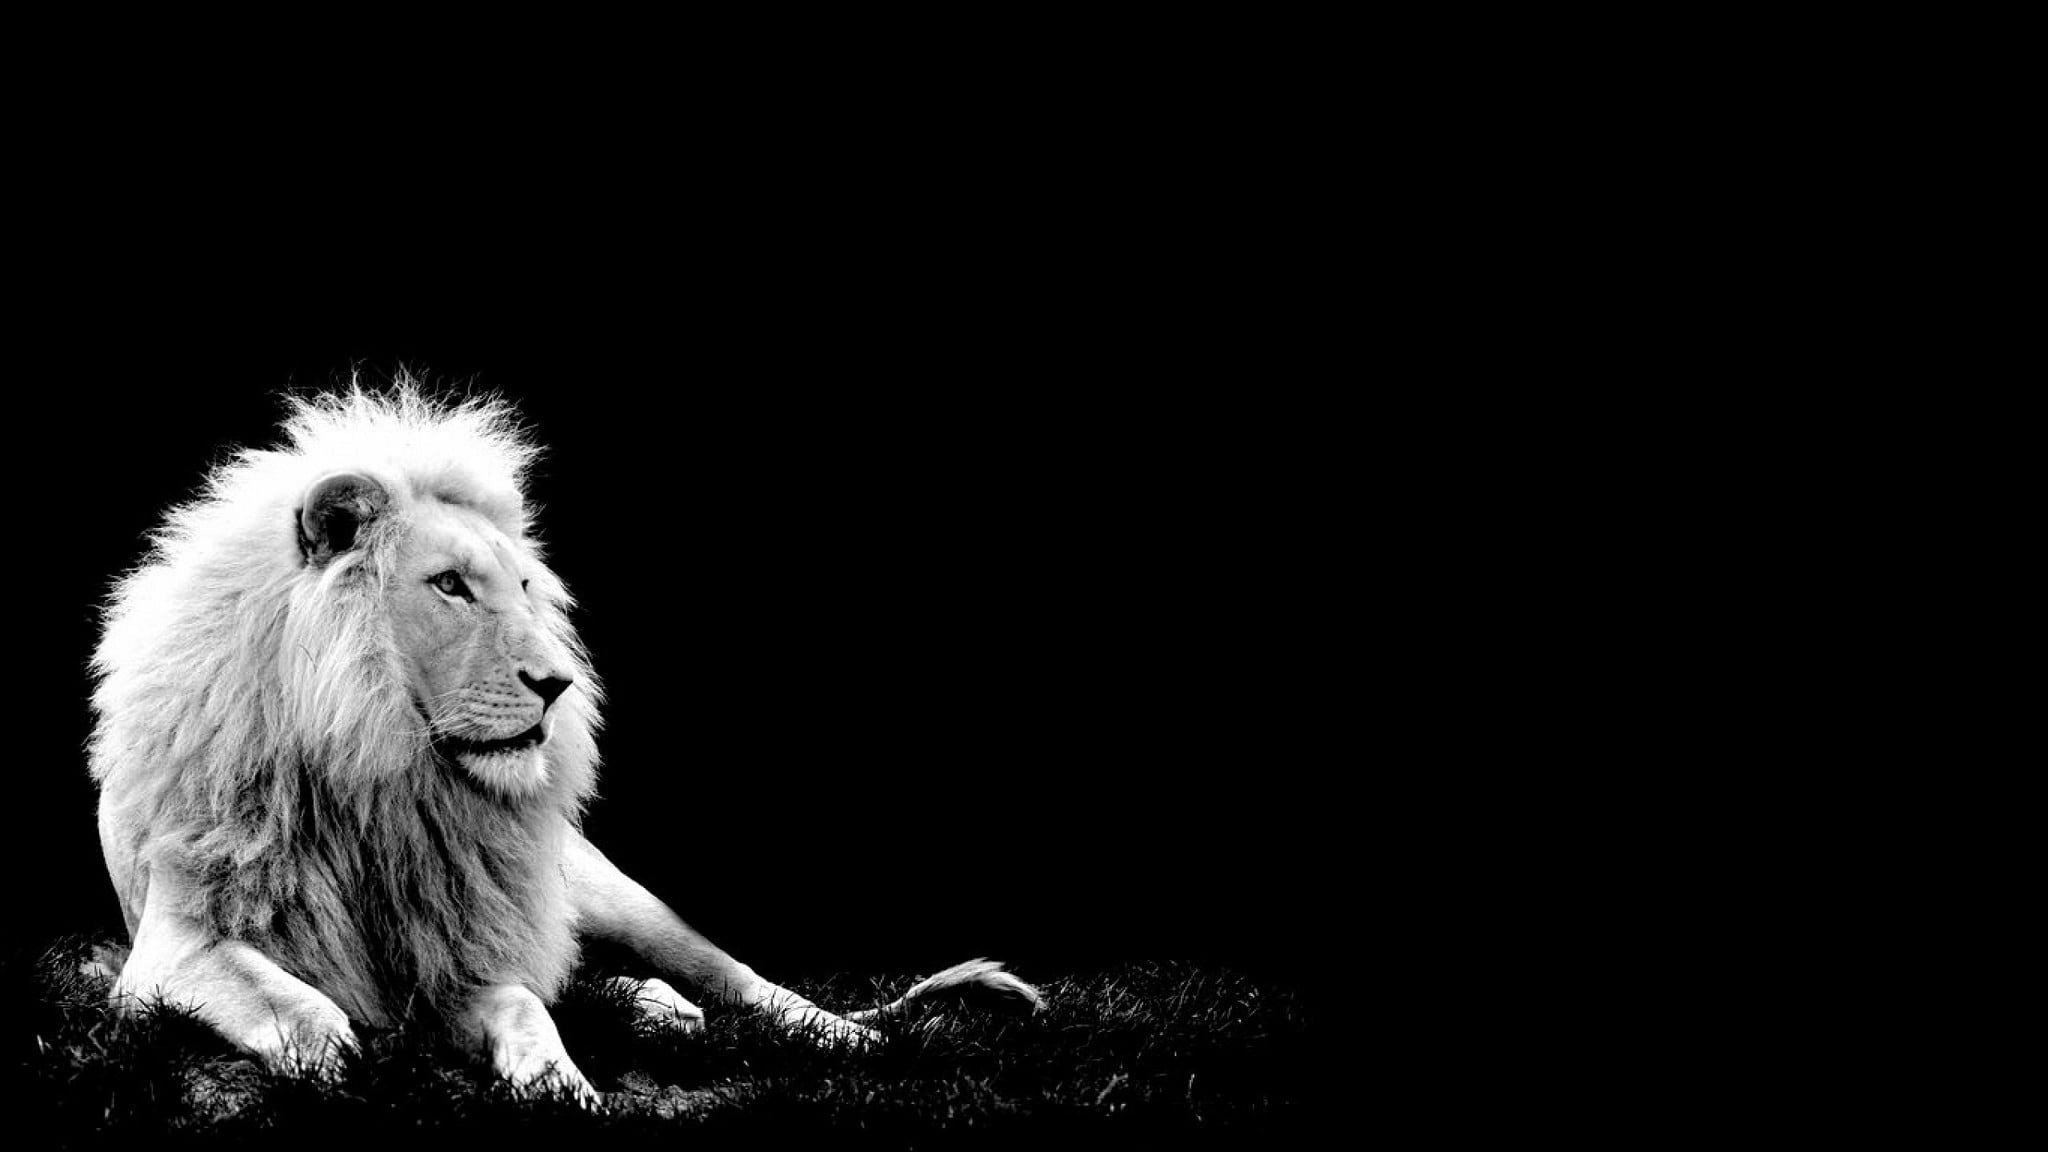 2048x1152 Awesome White Lion black background pictures